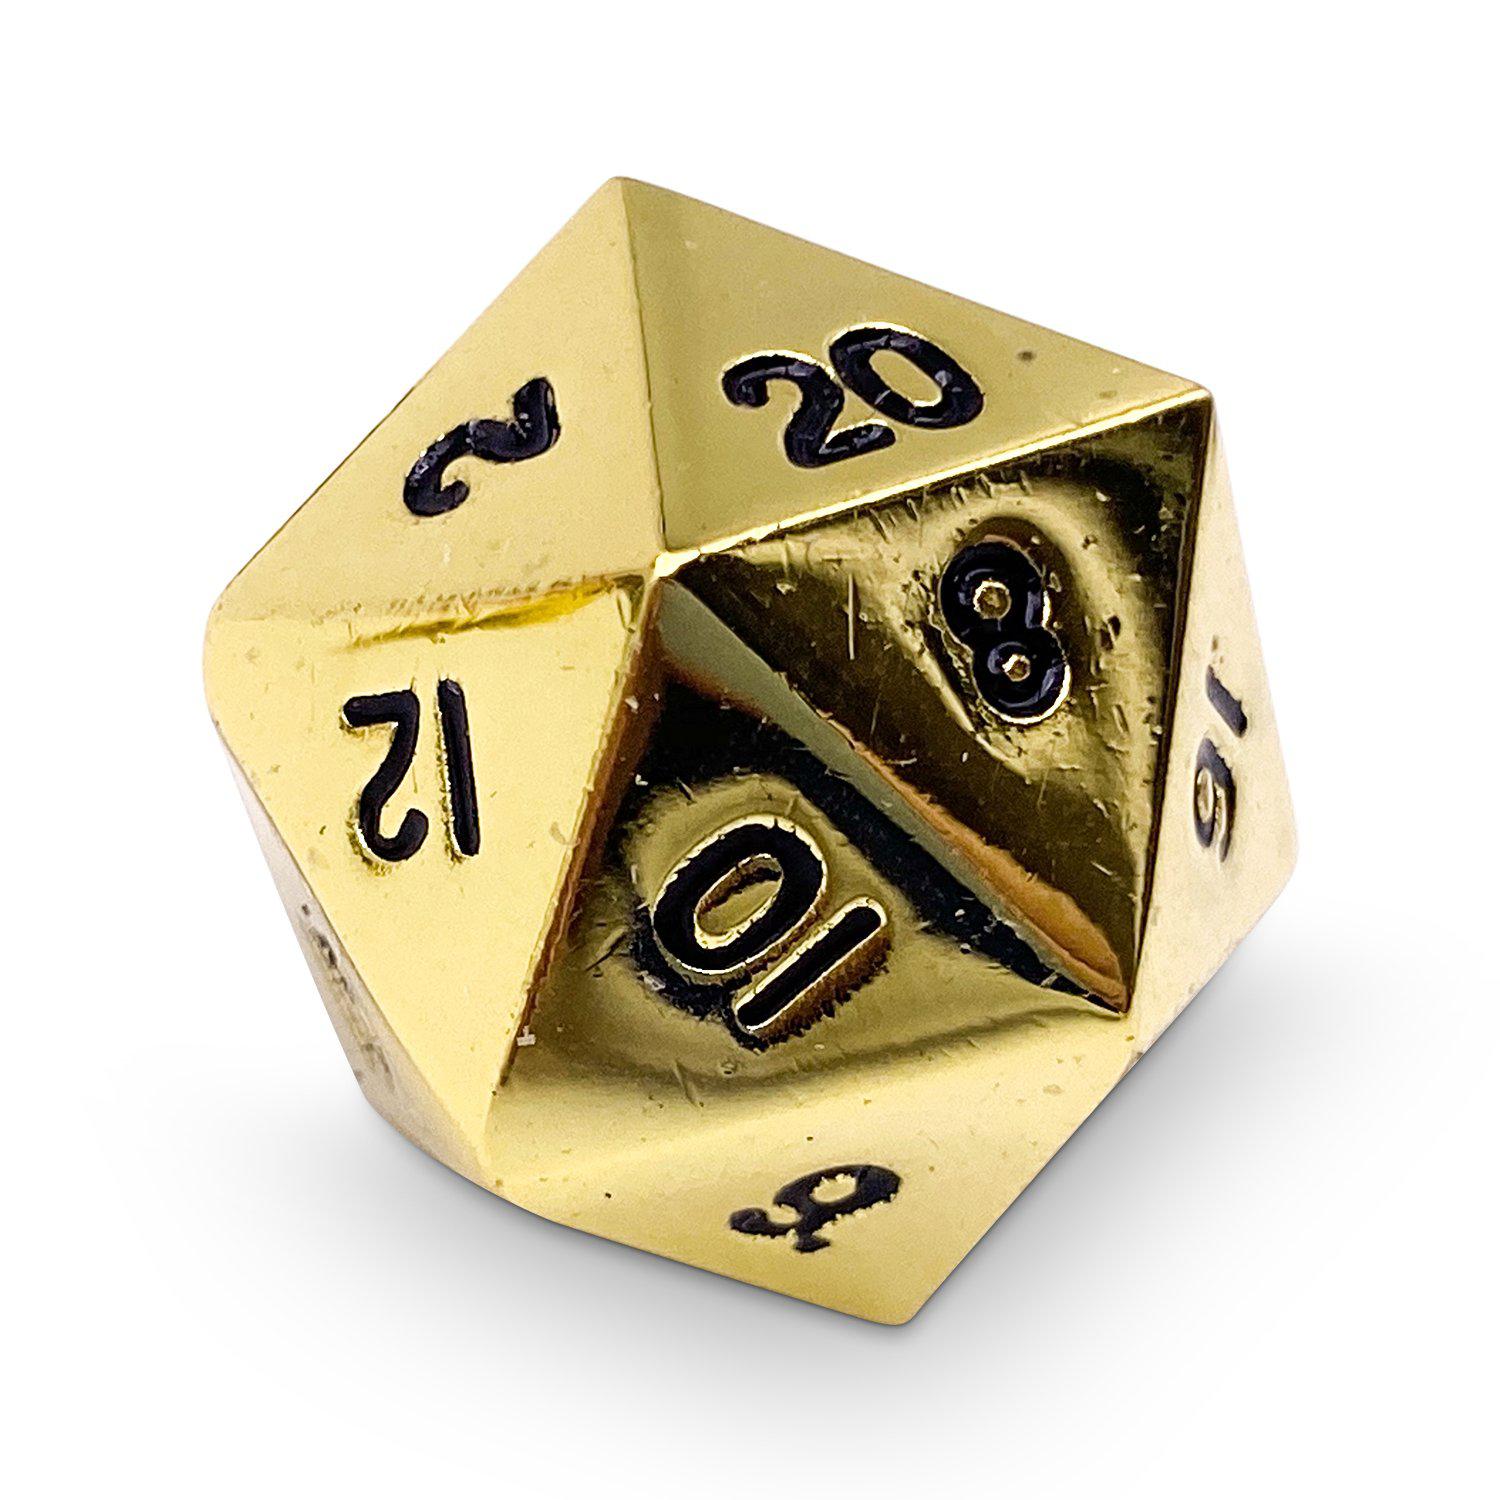 Single Alloy D20 in Dead Man's Gold by Norse Foundry - NOR 04556